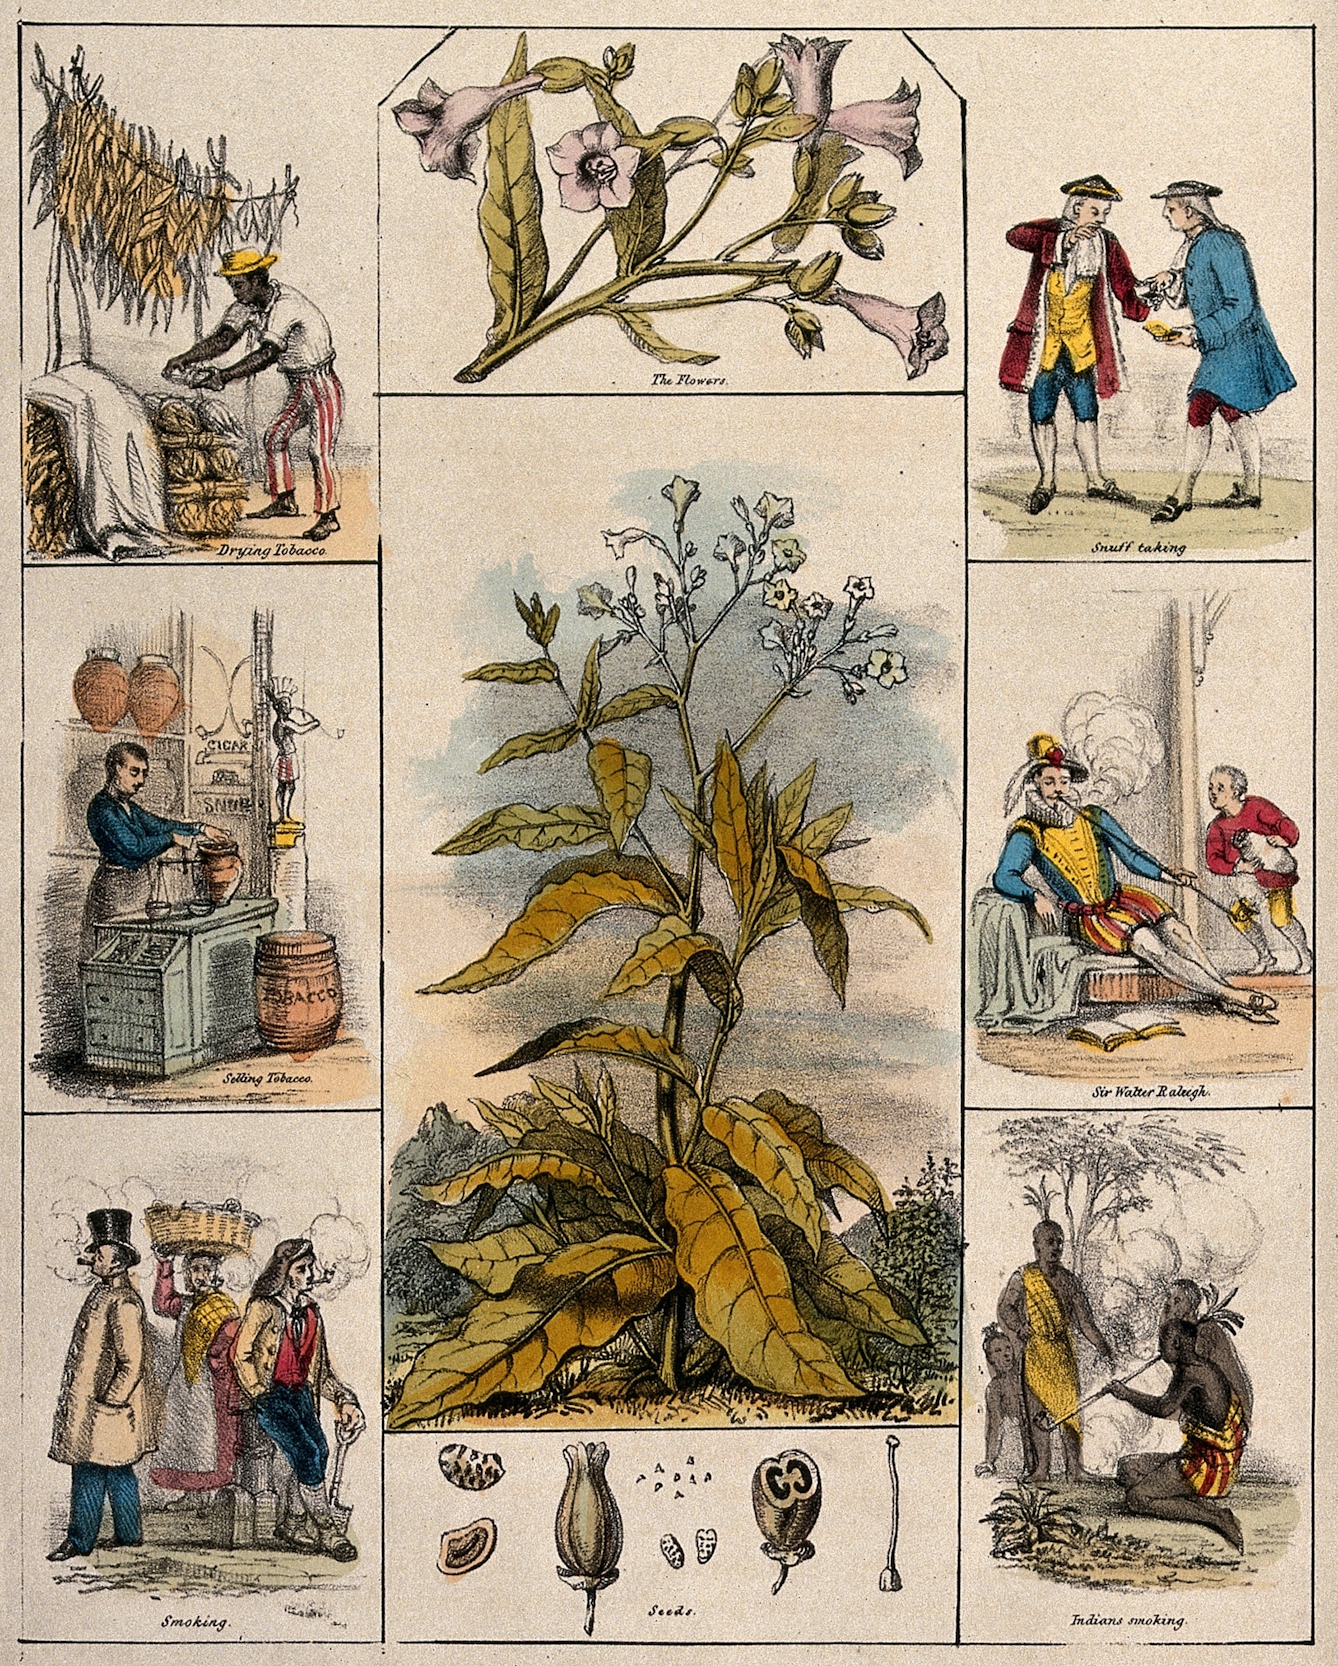 Coloured lithograph showing the tobacco plant, the flowers, seeds, drying tobacco, selling tobacco, smoking, snuff taking, Sir Walter Raleigh, Indians smoking